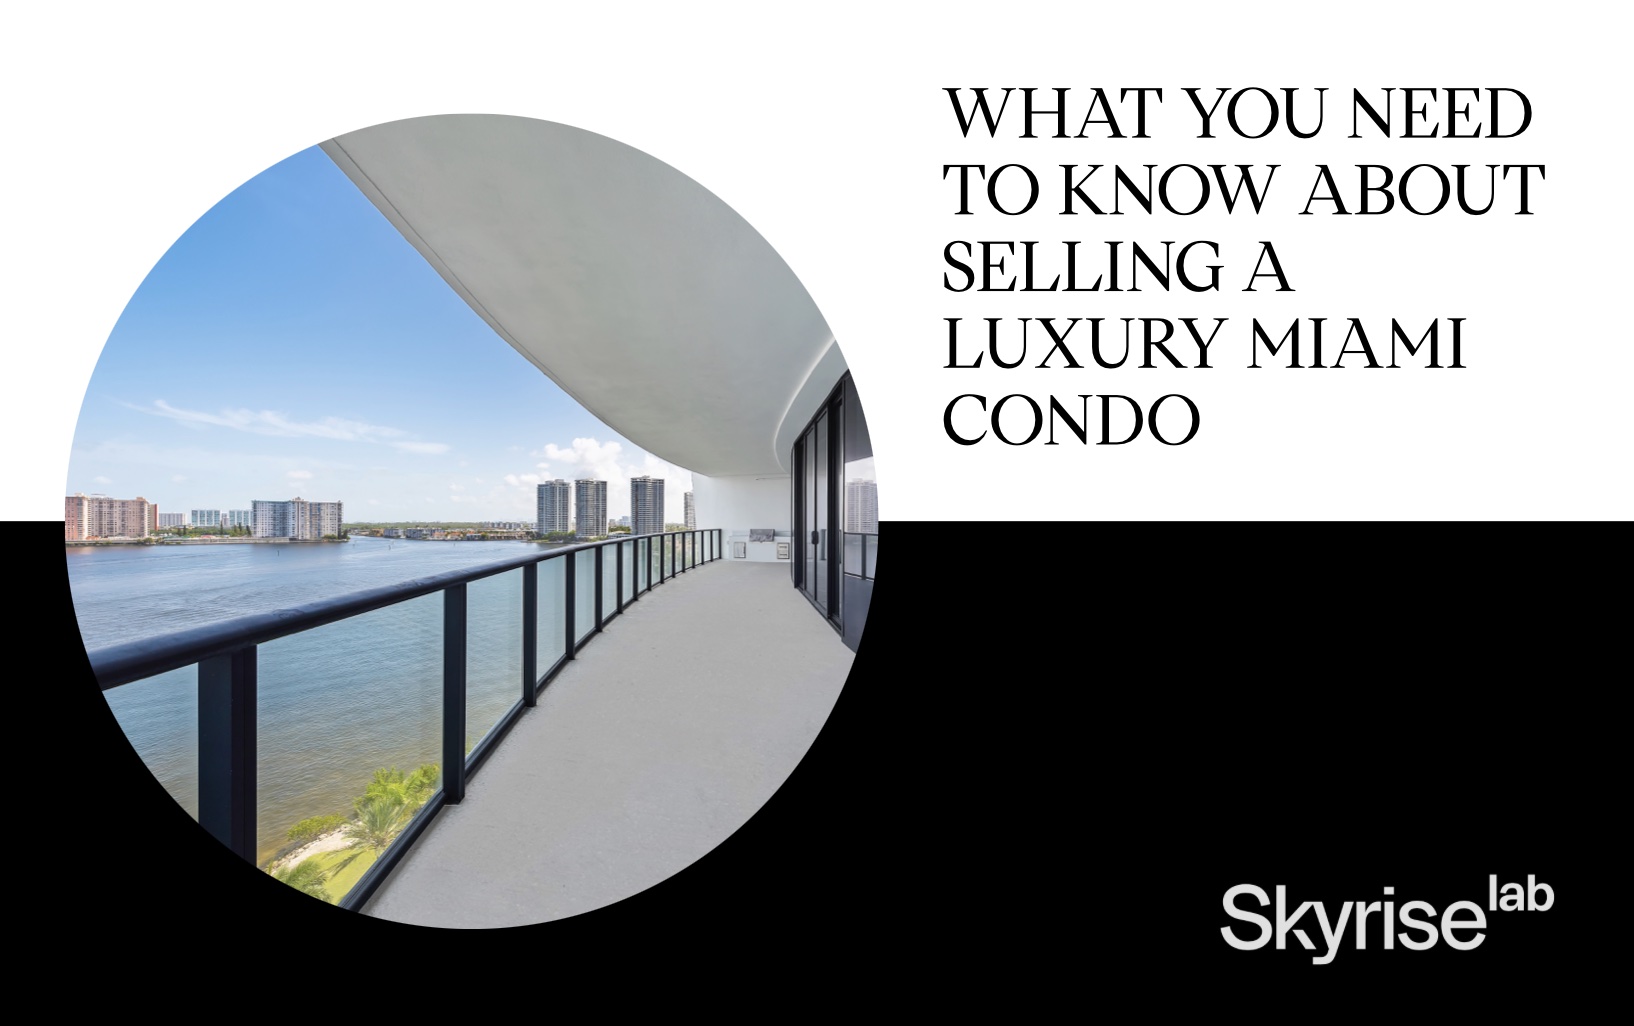 What You Need to Know About Selling a Luxury Miami Condo